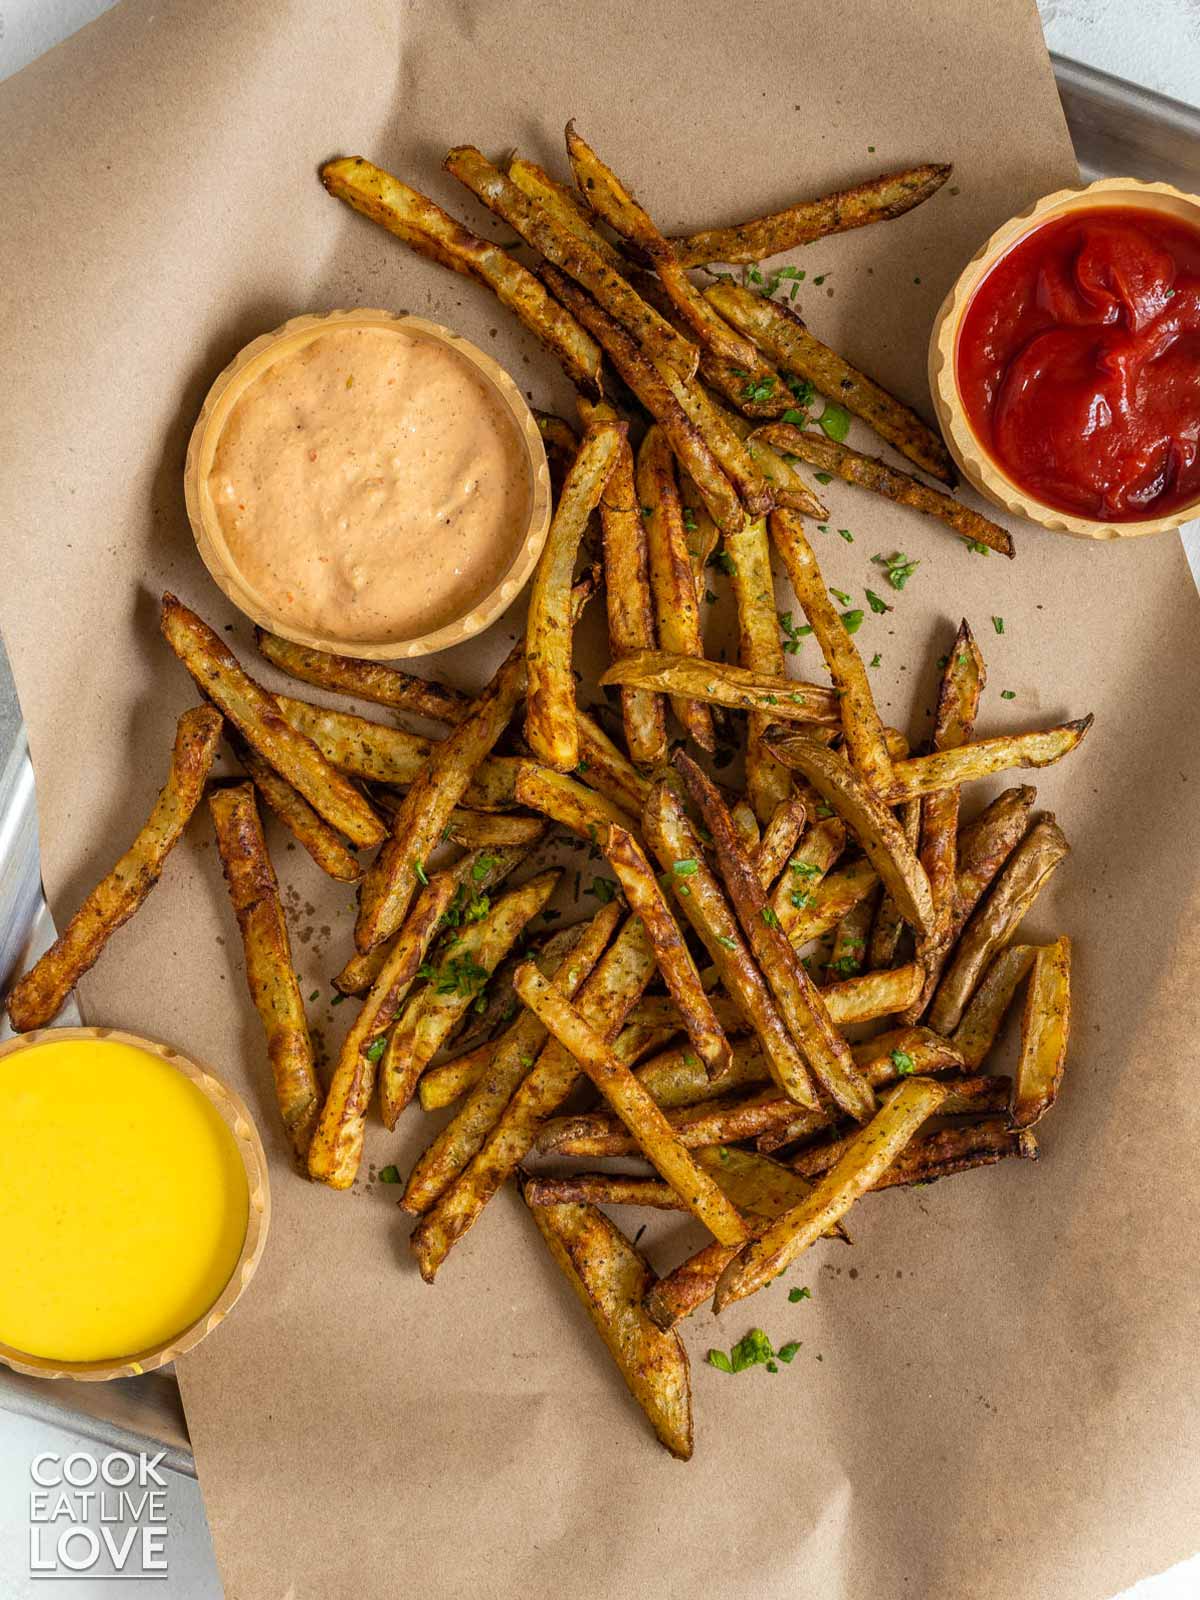 Oven fries are finished baking and served up on craft paper with sauces.